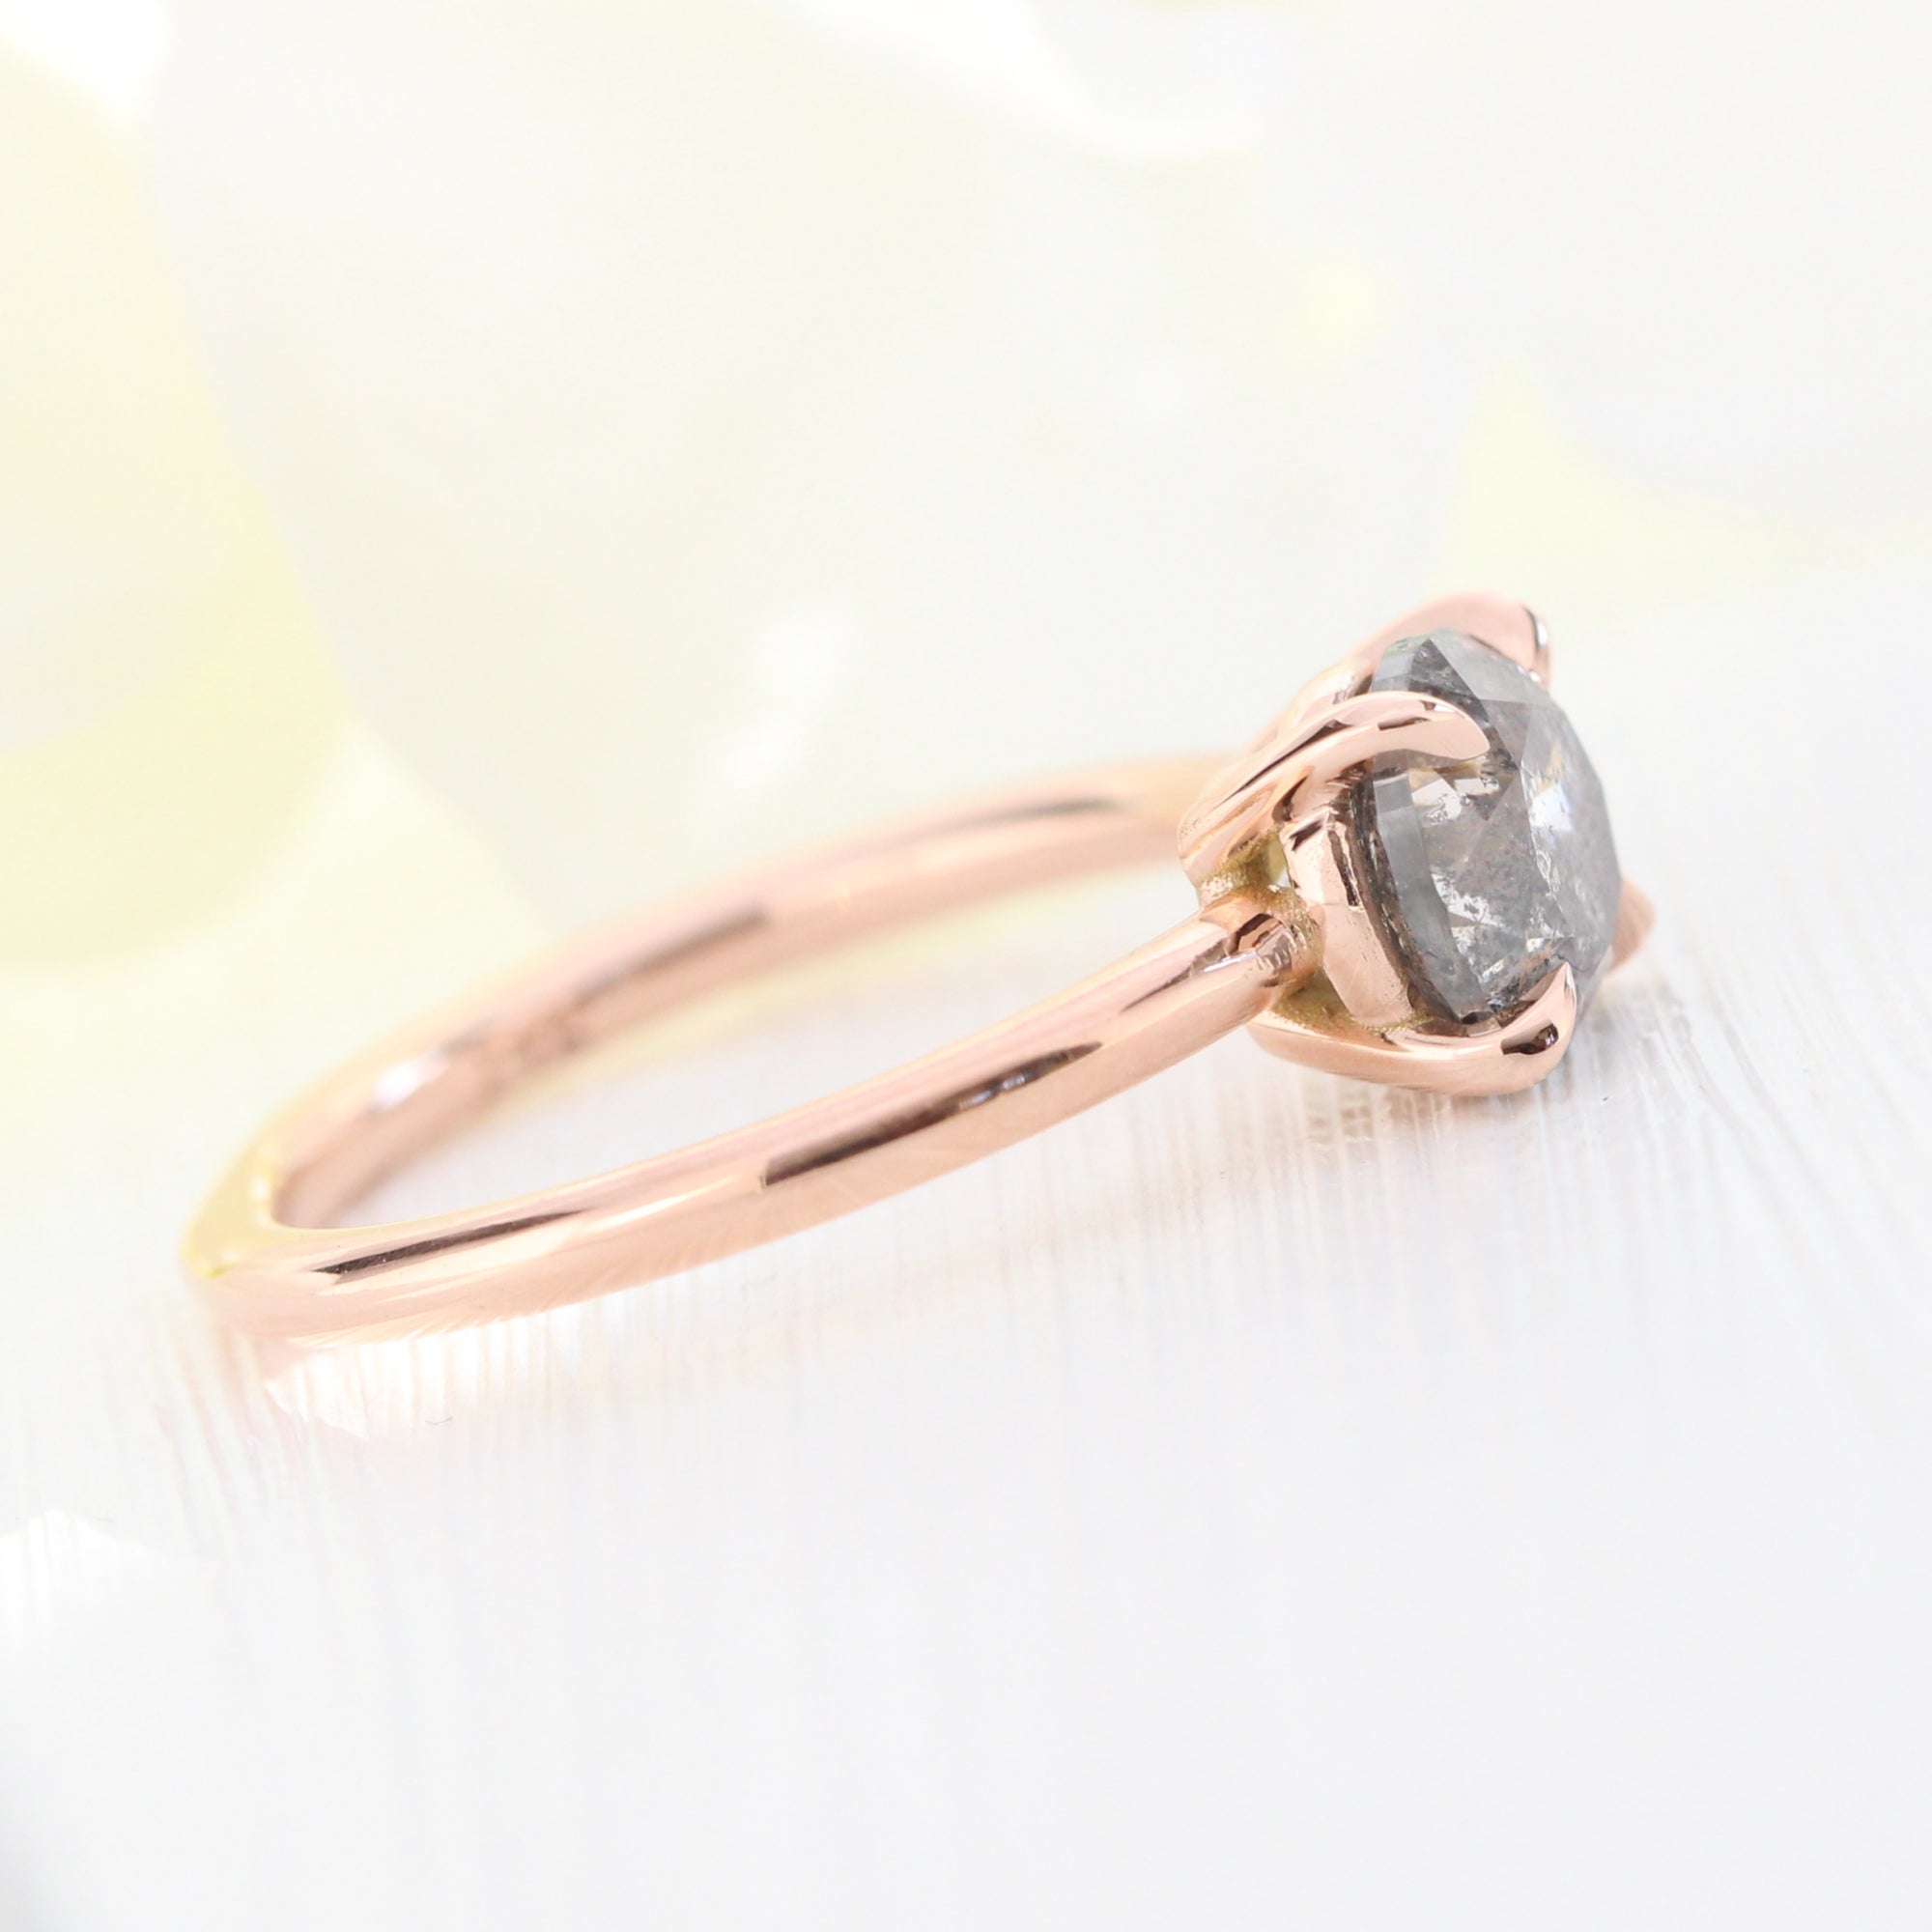 Large Salt and Pepper Diamond Engagement Ring Rose Gold Solitaire Grey Diamond Ring La More Design Jewelry